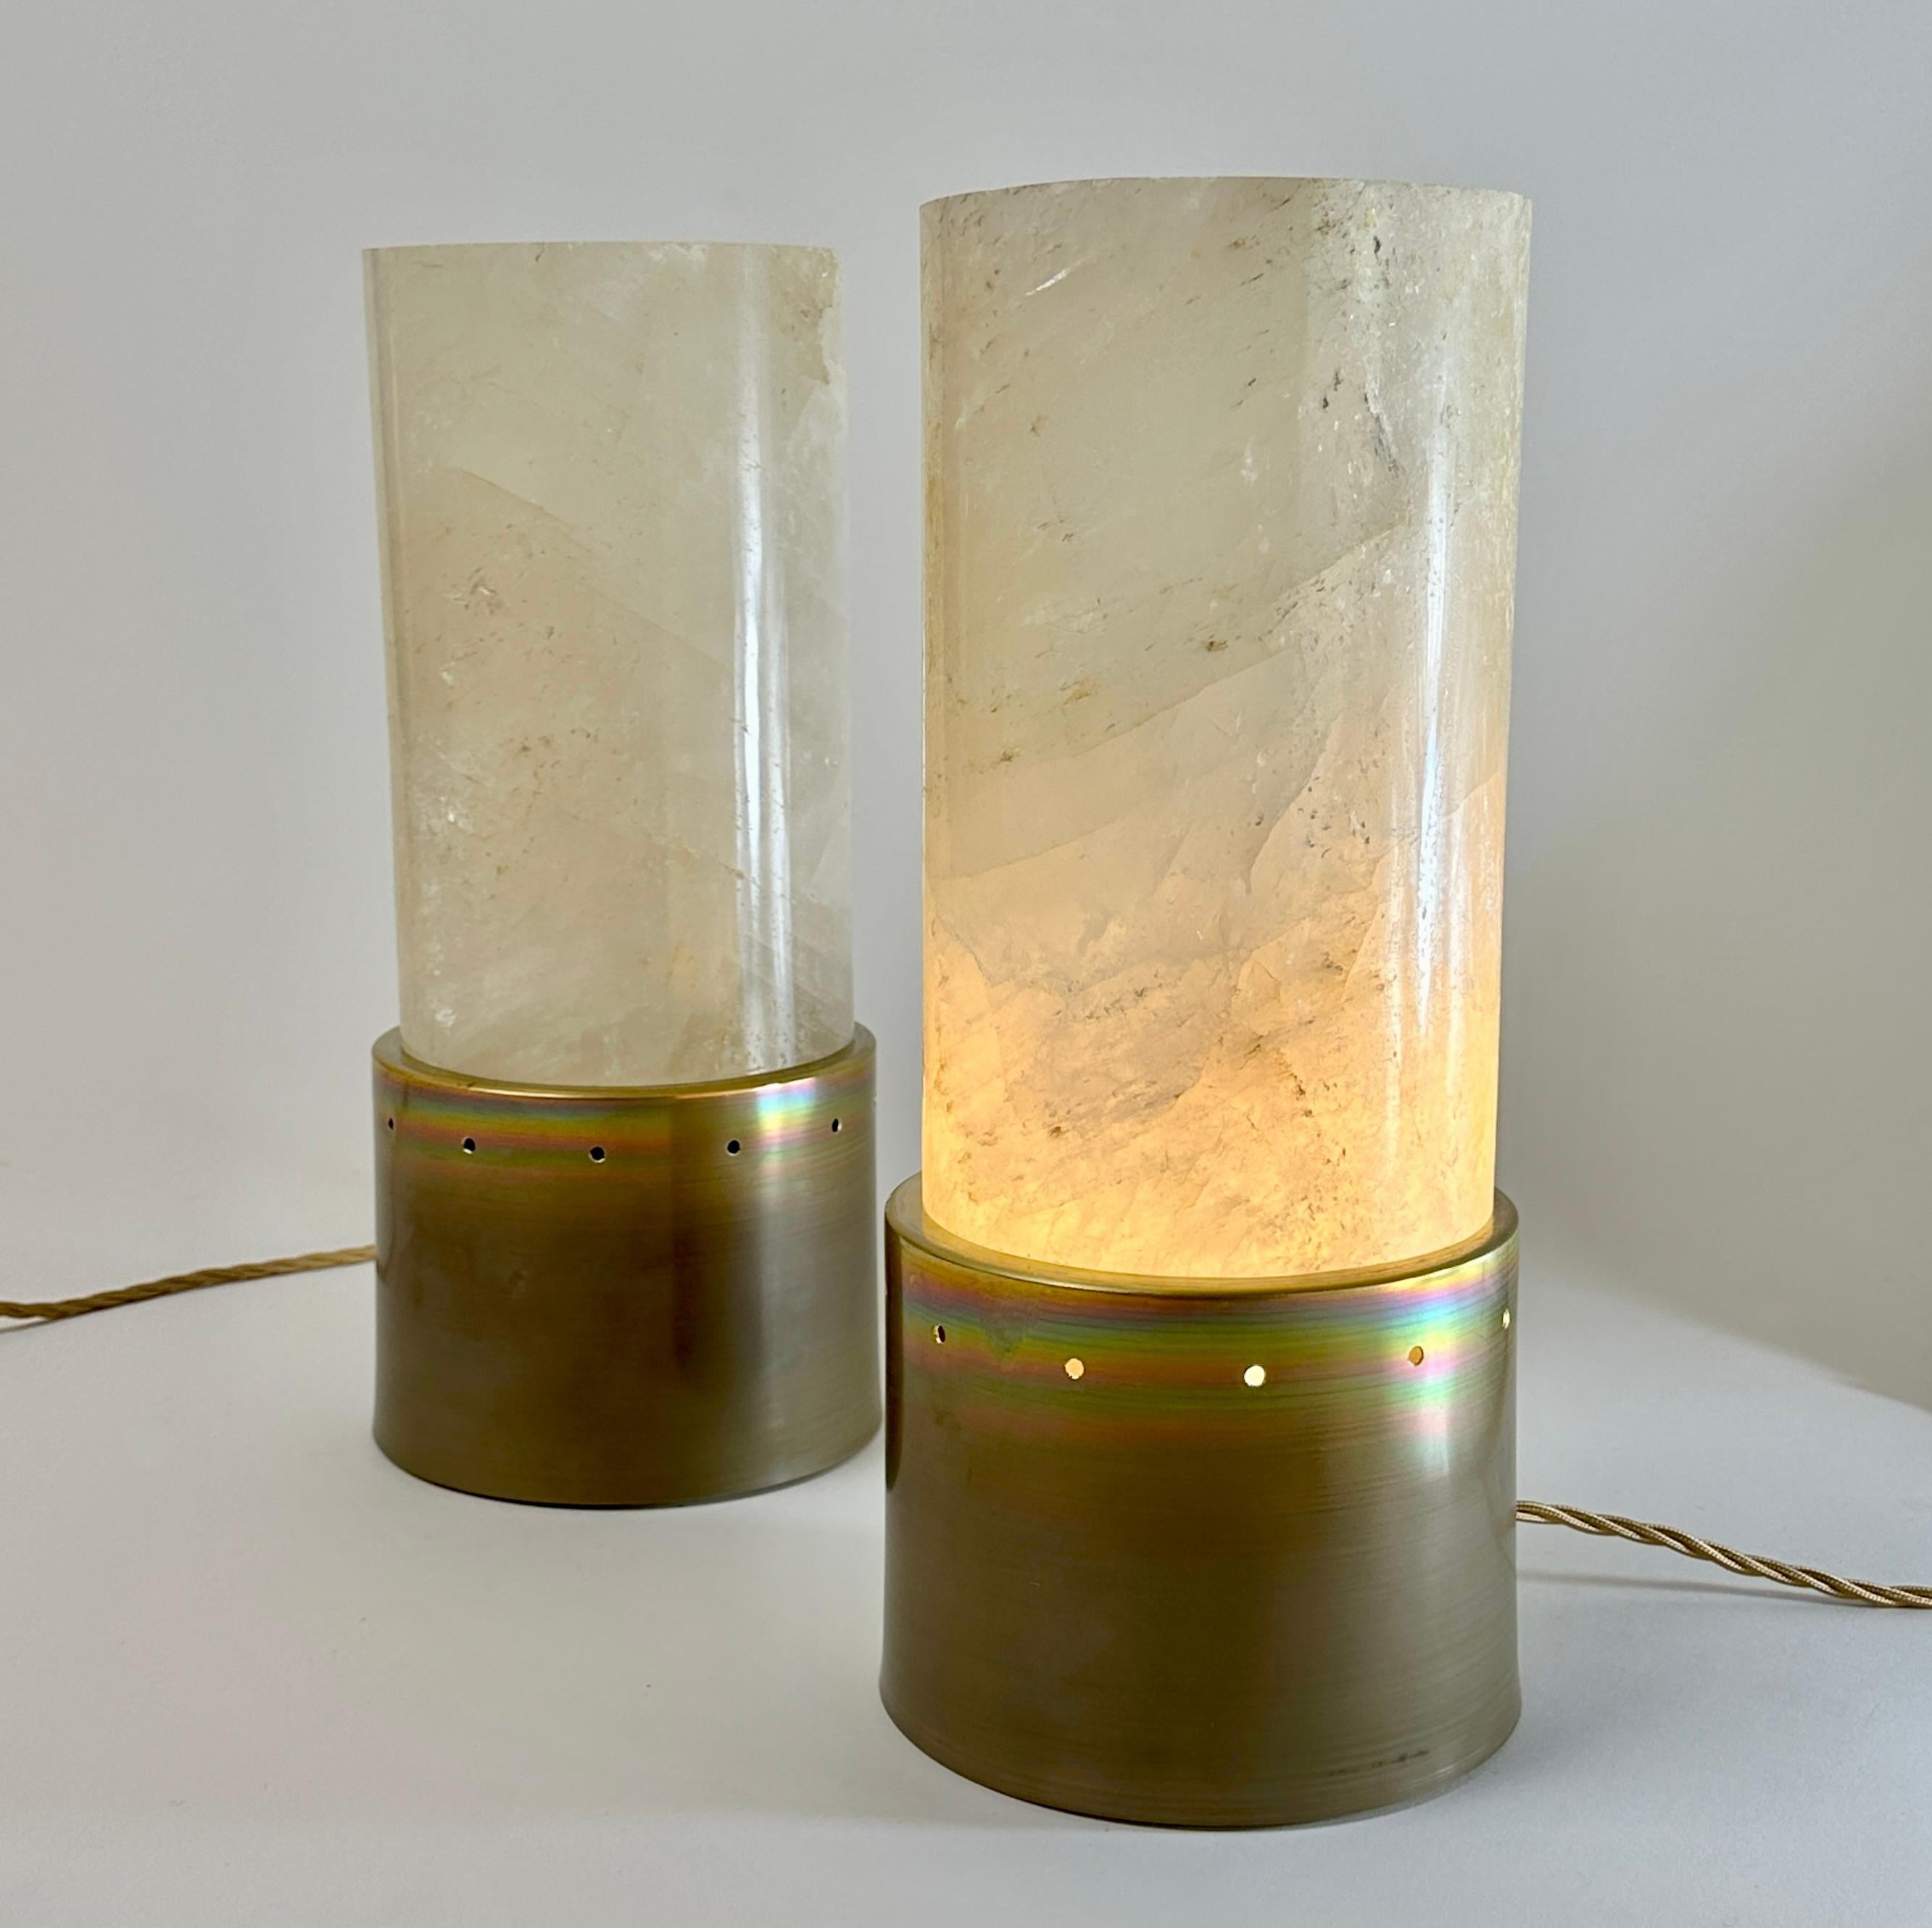 Stunning pair of extremely modern & collectible table lamps. The rock crystal cylinder is a solid block of 14 Diameter x 24 Height cm. placed on top of the round brass body.
One E27 Light Bulb each.
The Italian plugs have to be changed while the